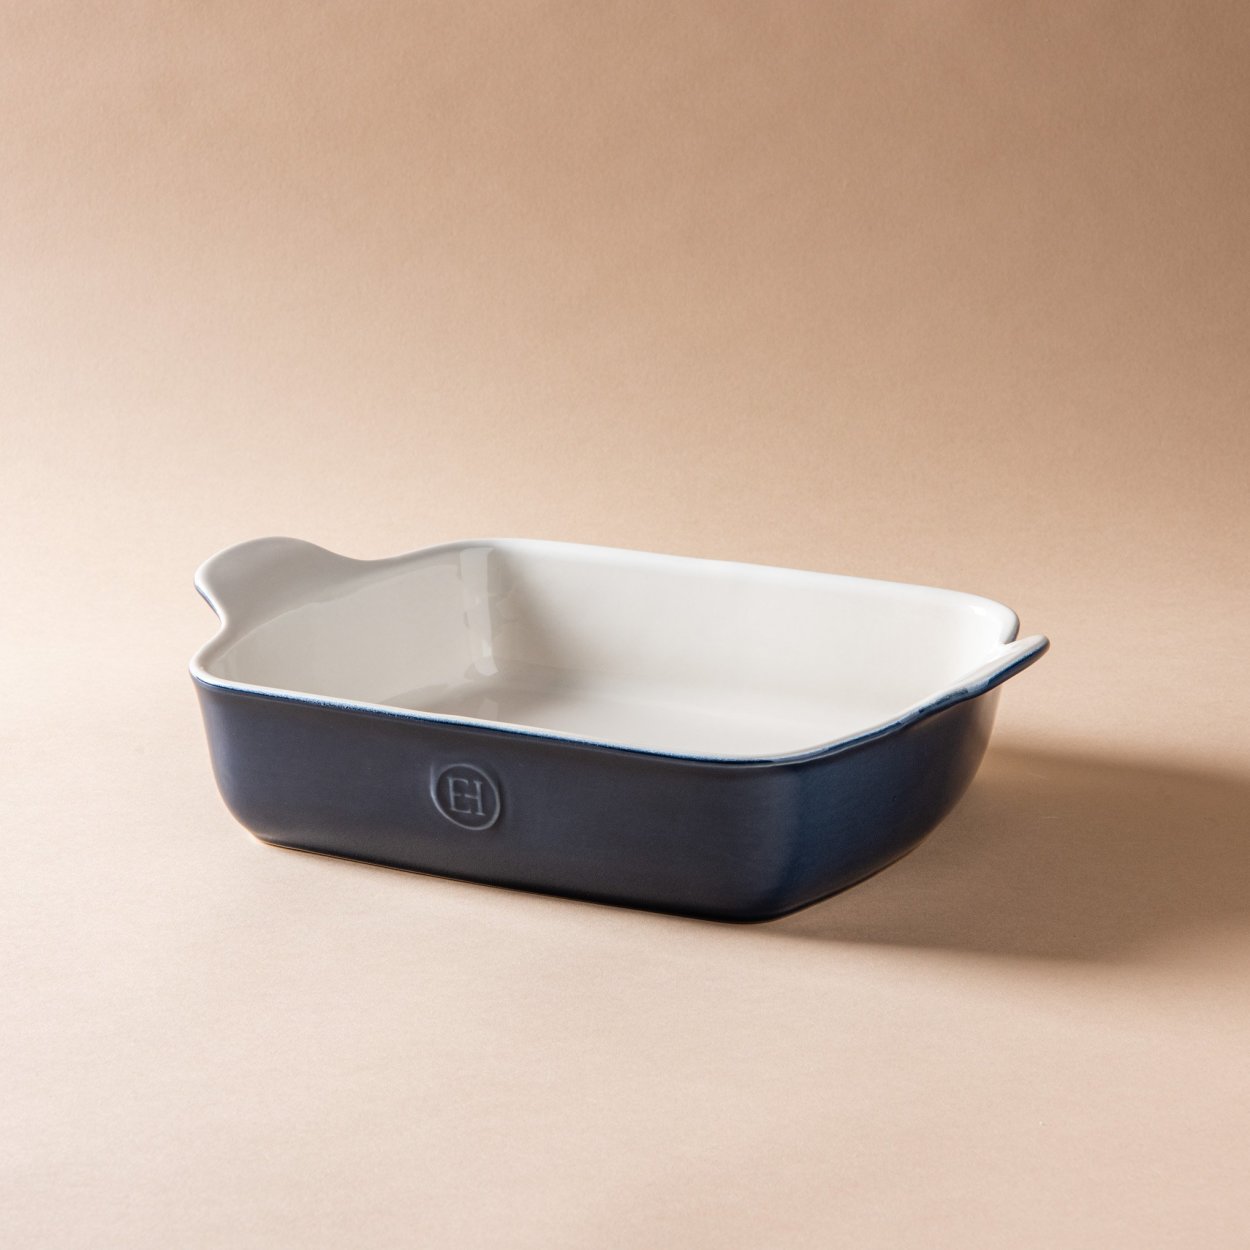 Emile Henry > Mixing Bowls > Small Mixing Bowl (Blue Flame